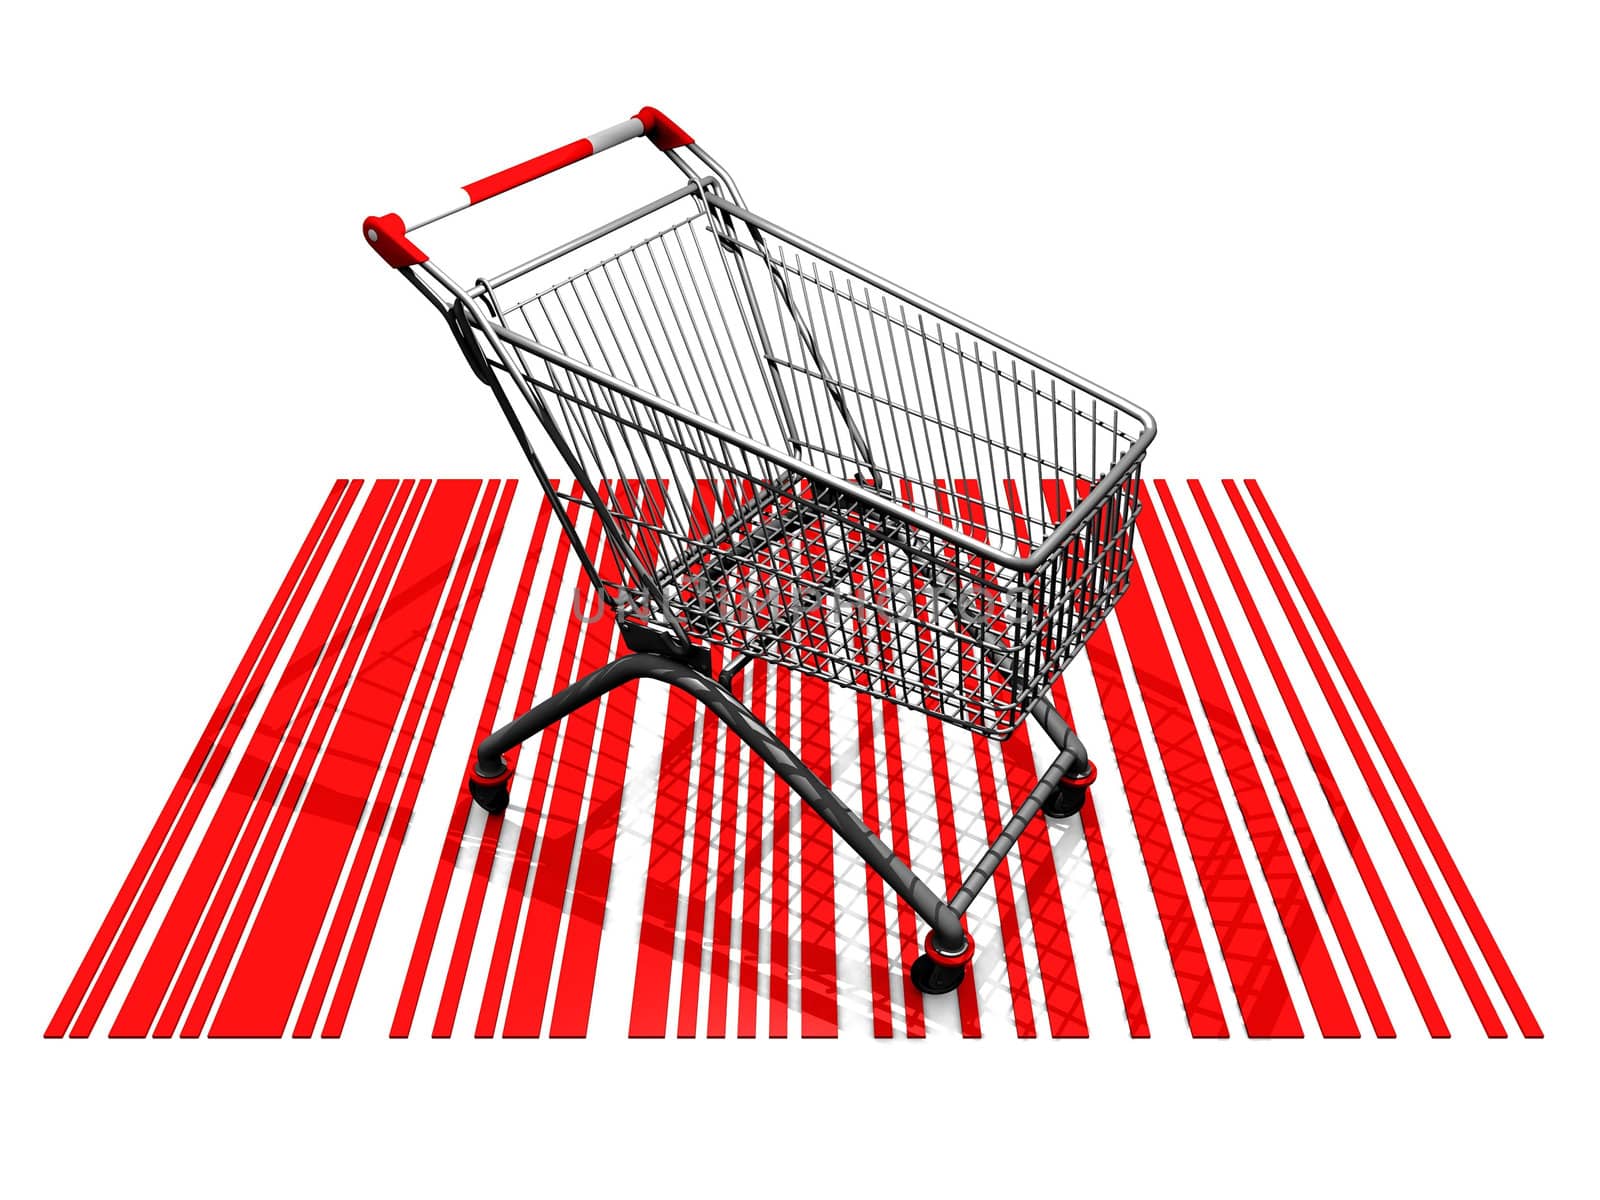 the shopping cart and the bar  codes by njaj